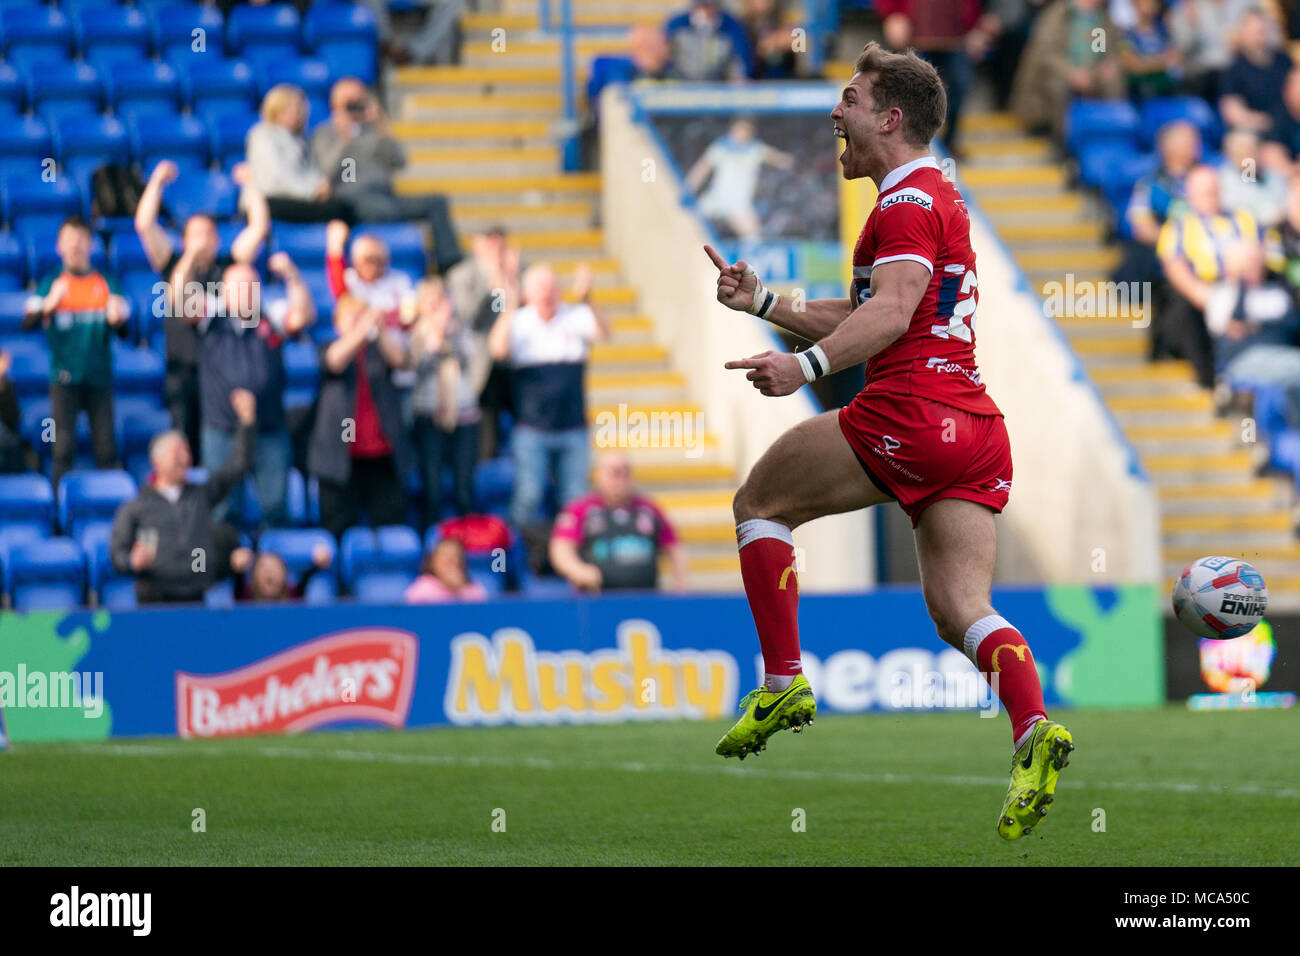 Hull's Chris Atkin celebrates scoring  a try  14th April 2018 , The Halliwell Jones Stadium Mike Gregory Way, Warrington, WA2 7NE, England;  Betfred Super League rugby, Round 11, Warrington Wolves v Hull Kingston Rovers Stock Photo